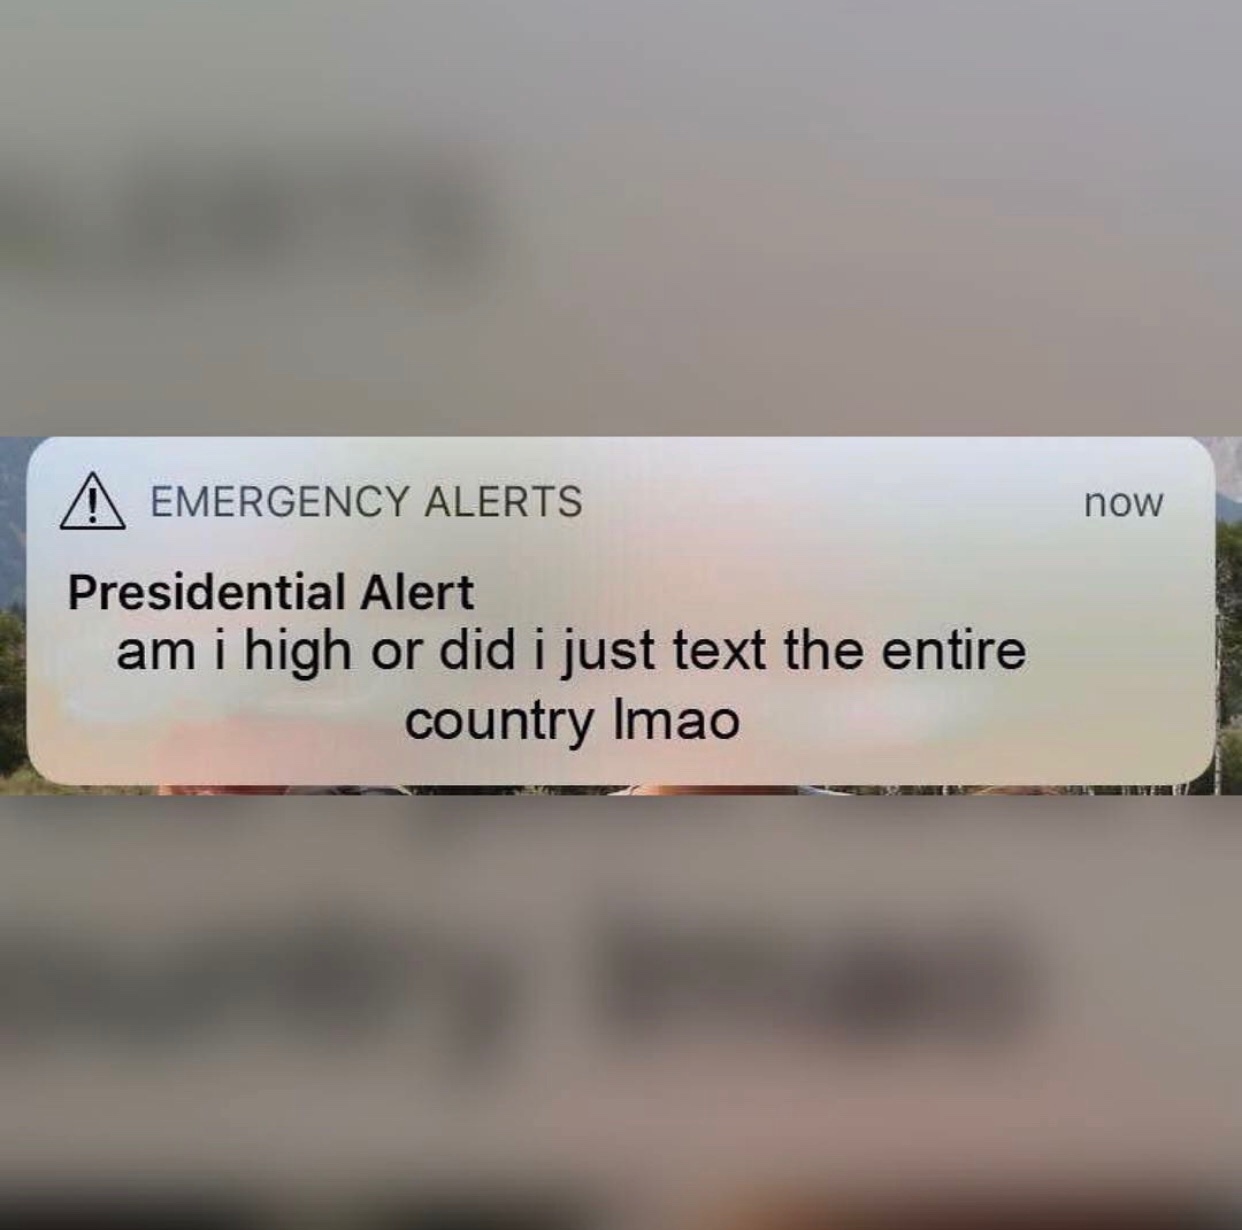 first presidential alert in history was lit af! can’t wait for the future ones. - meme